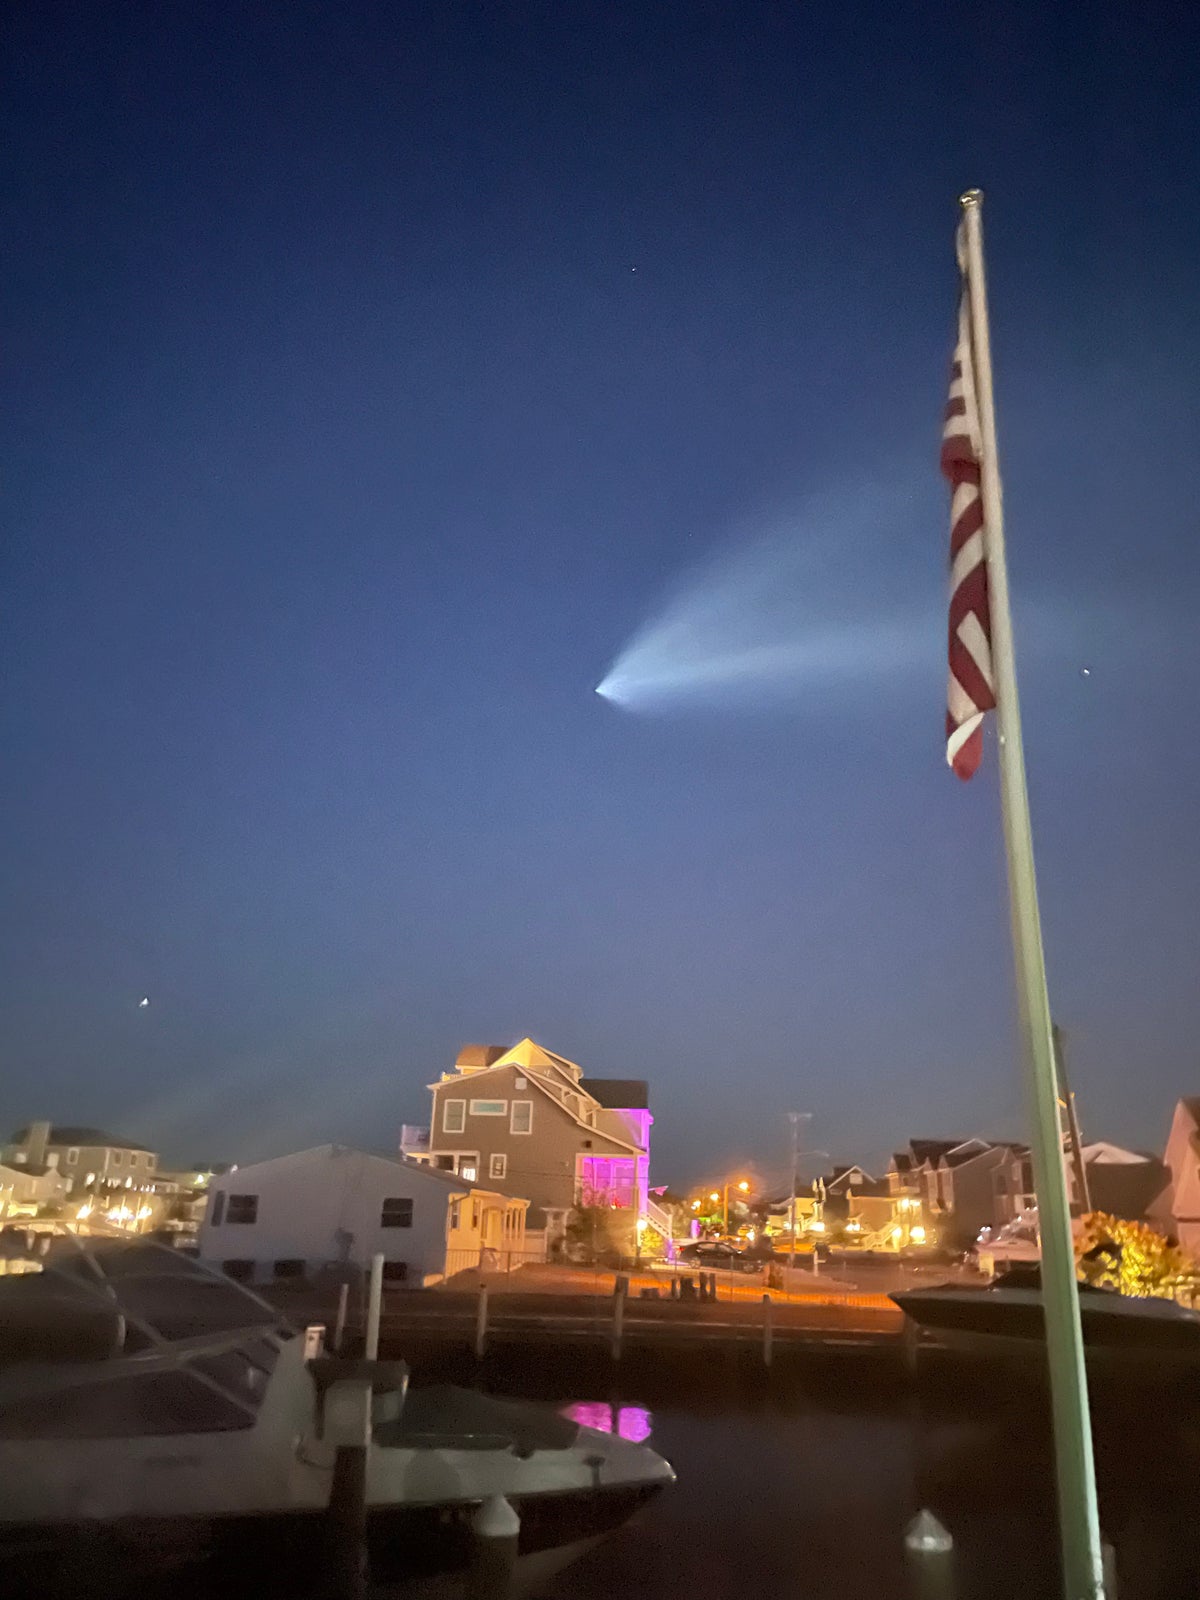 Space X Falcon 9 rocket's vapor trail seen over Toms River. Photo courtesy of viewer News 12 New Jersey viewer Michele Arocha's husband.